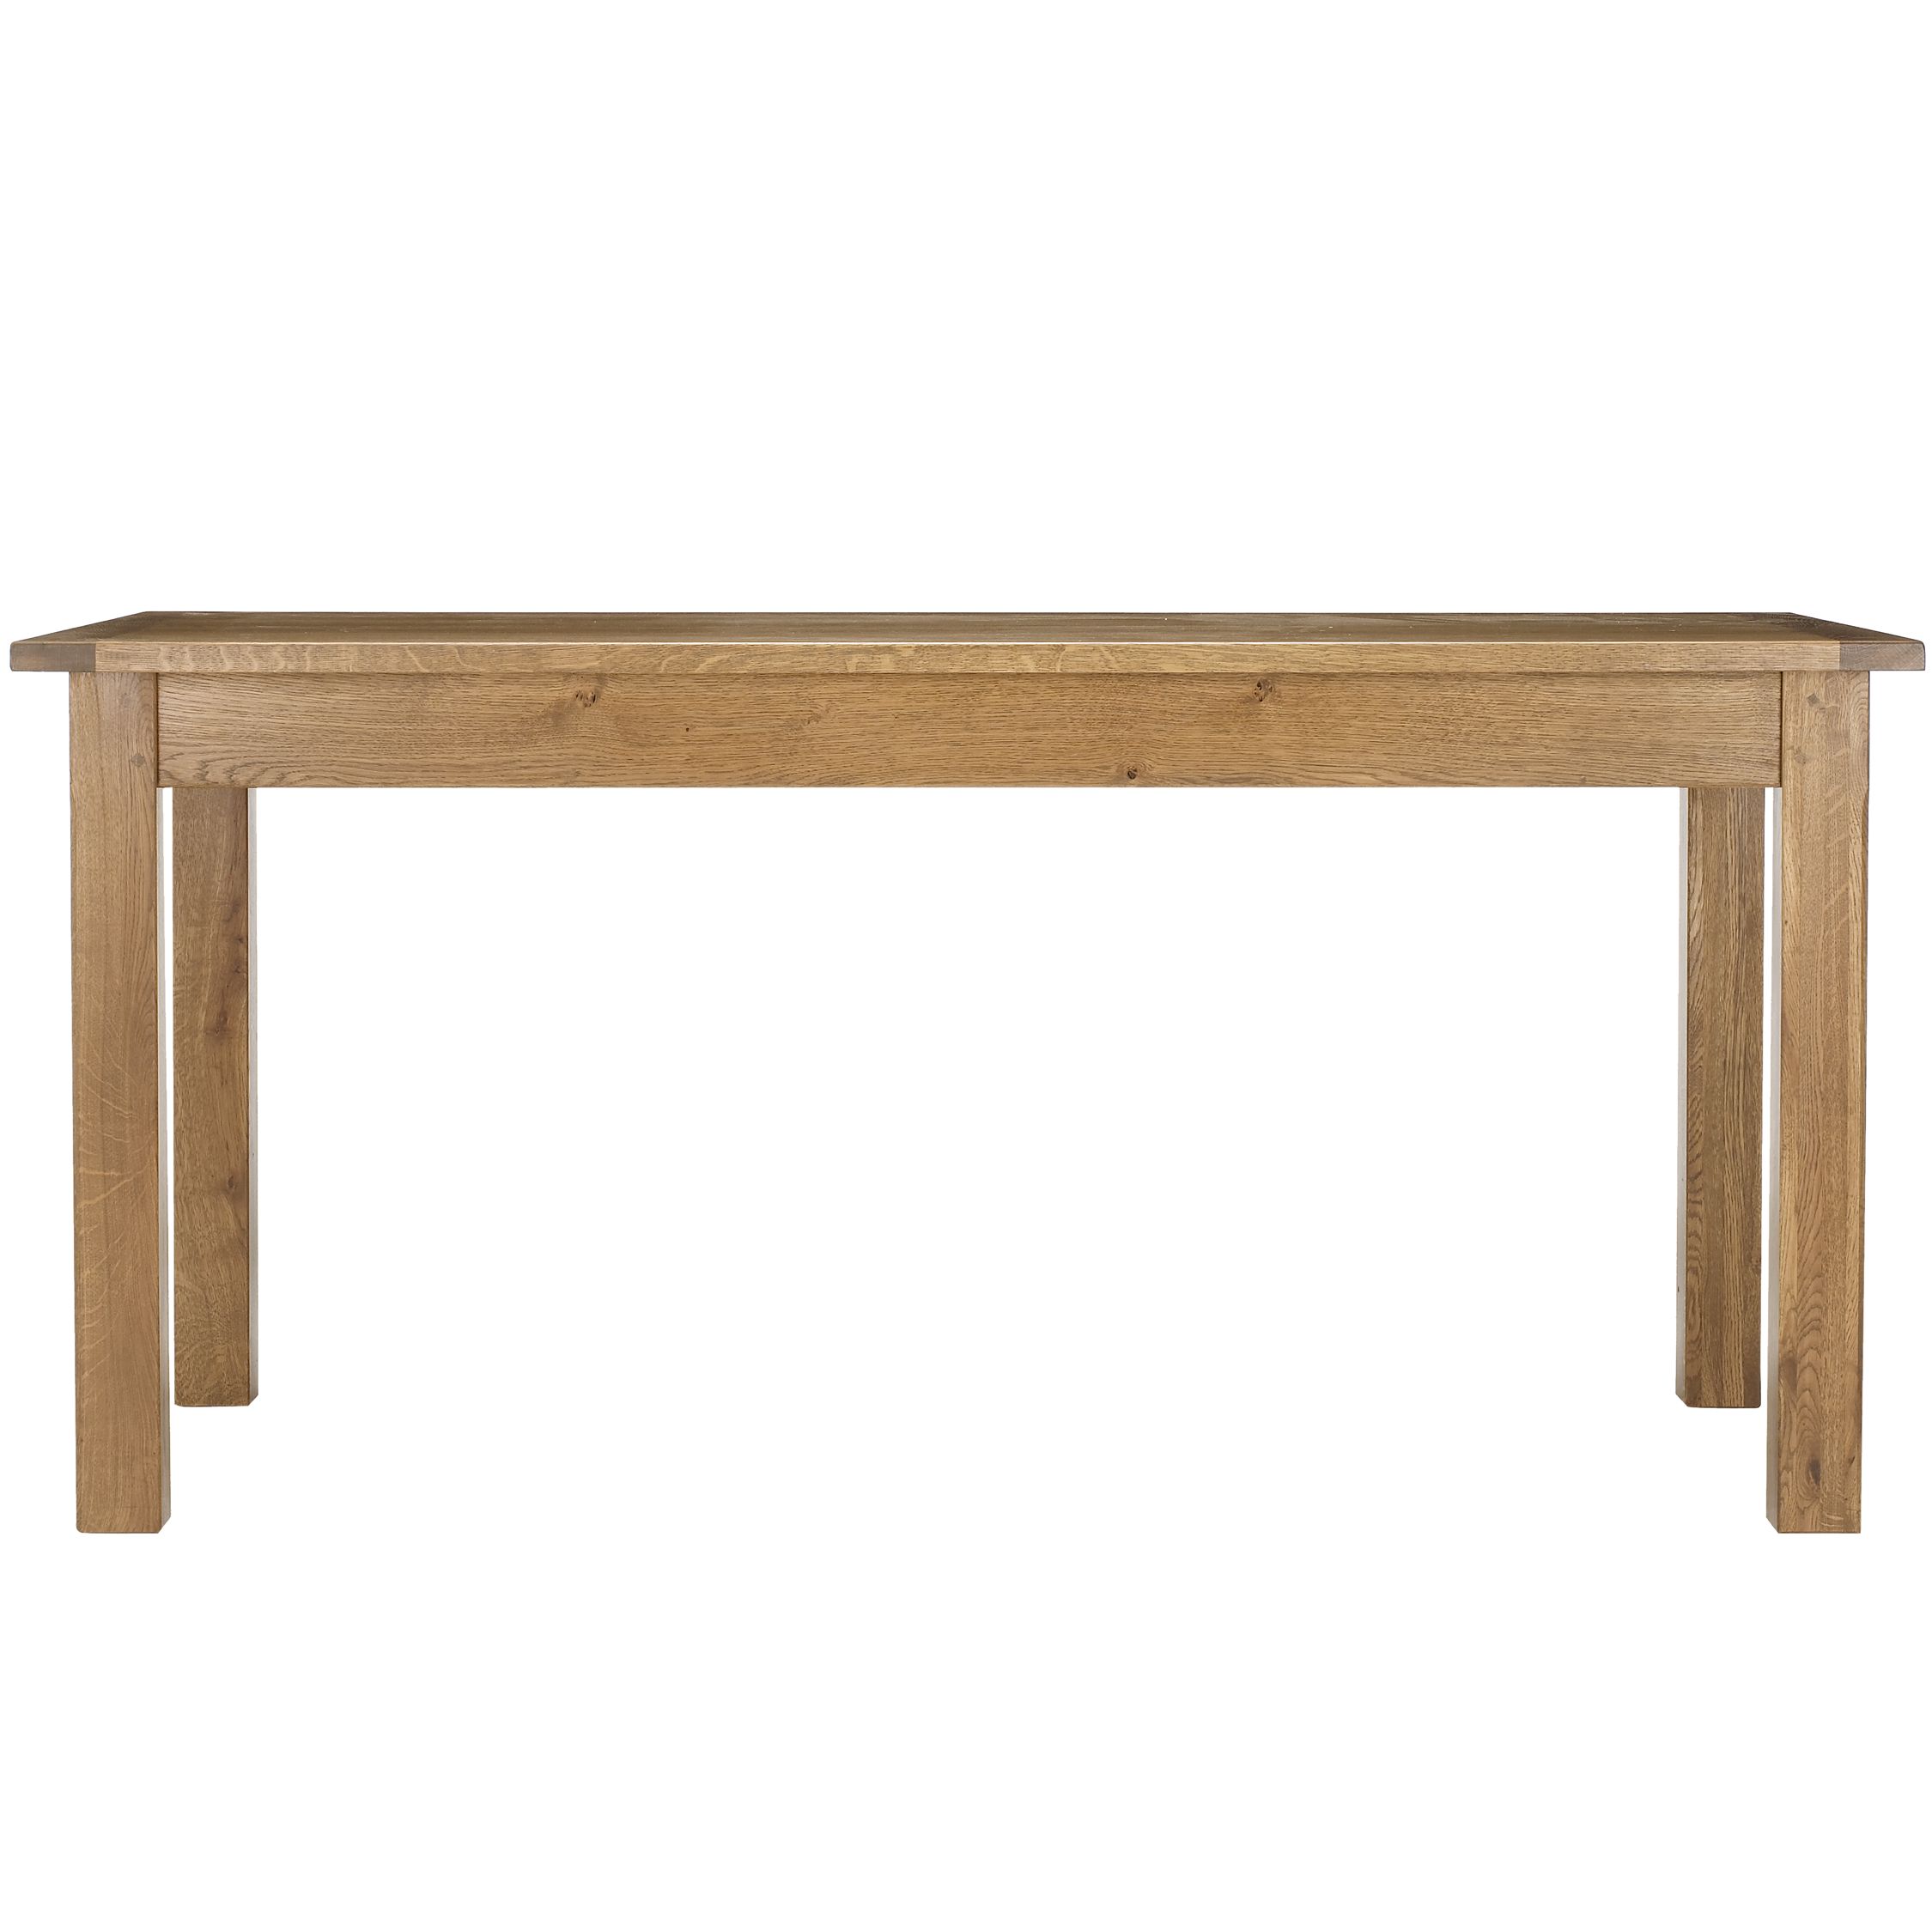 John Lewis Ardennes Small Dining Table, Cognac